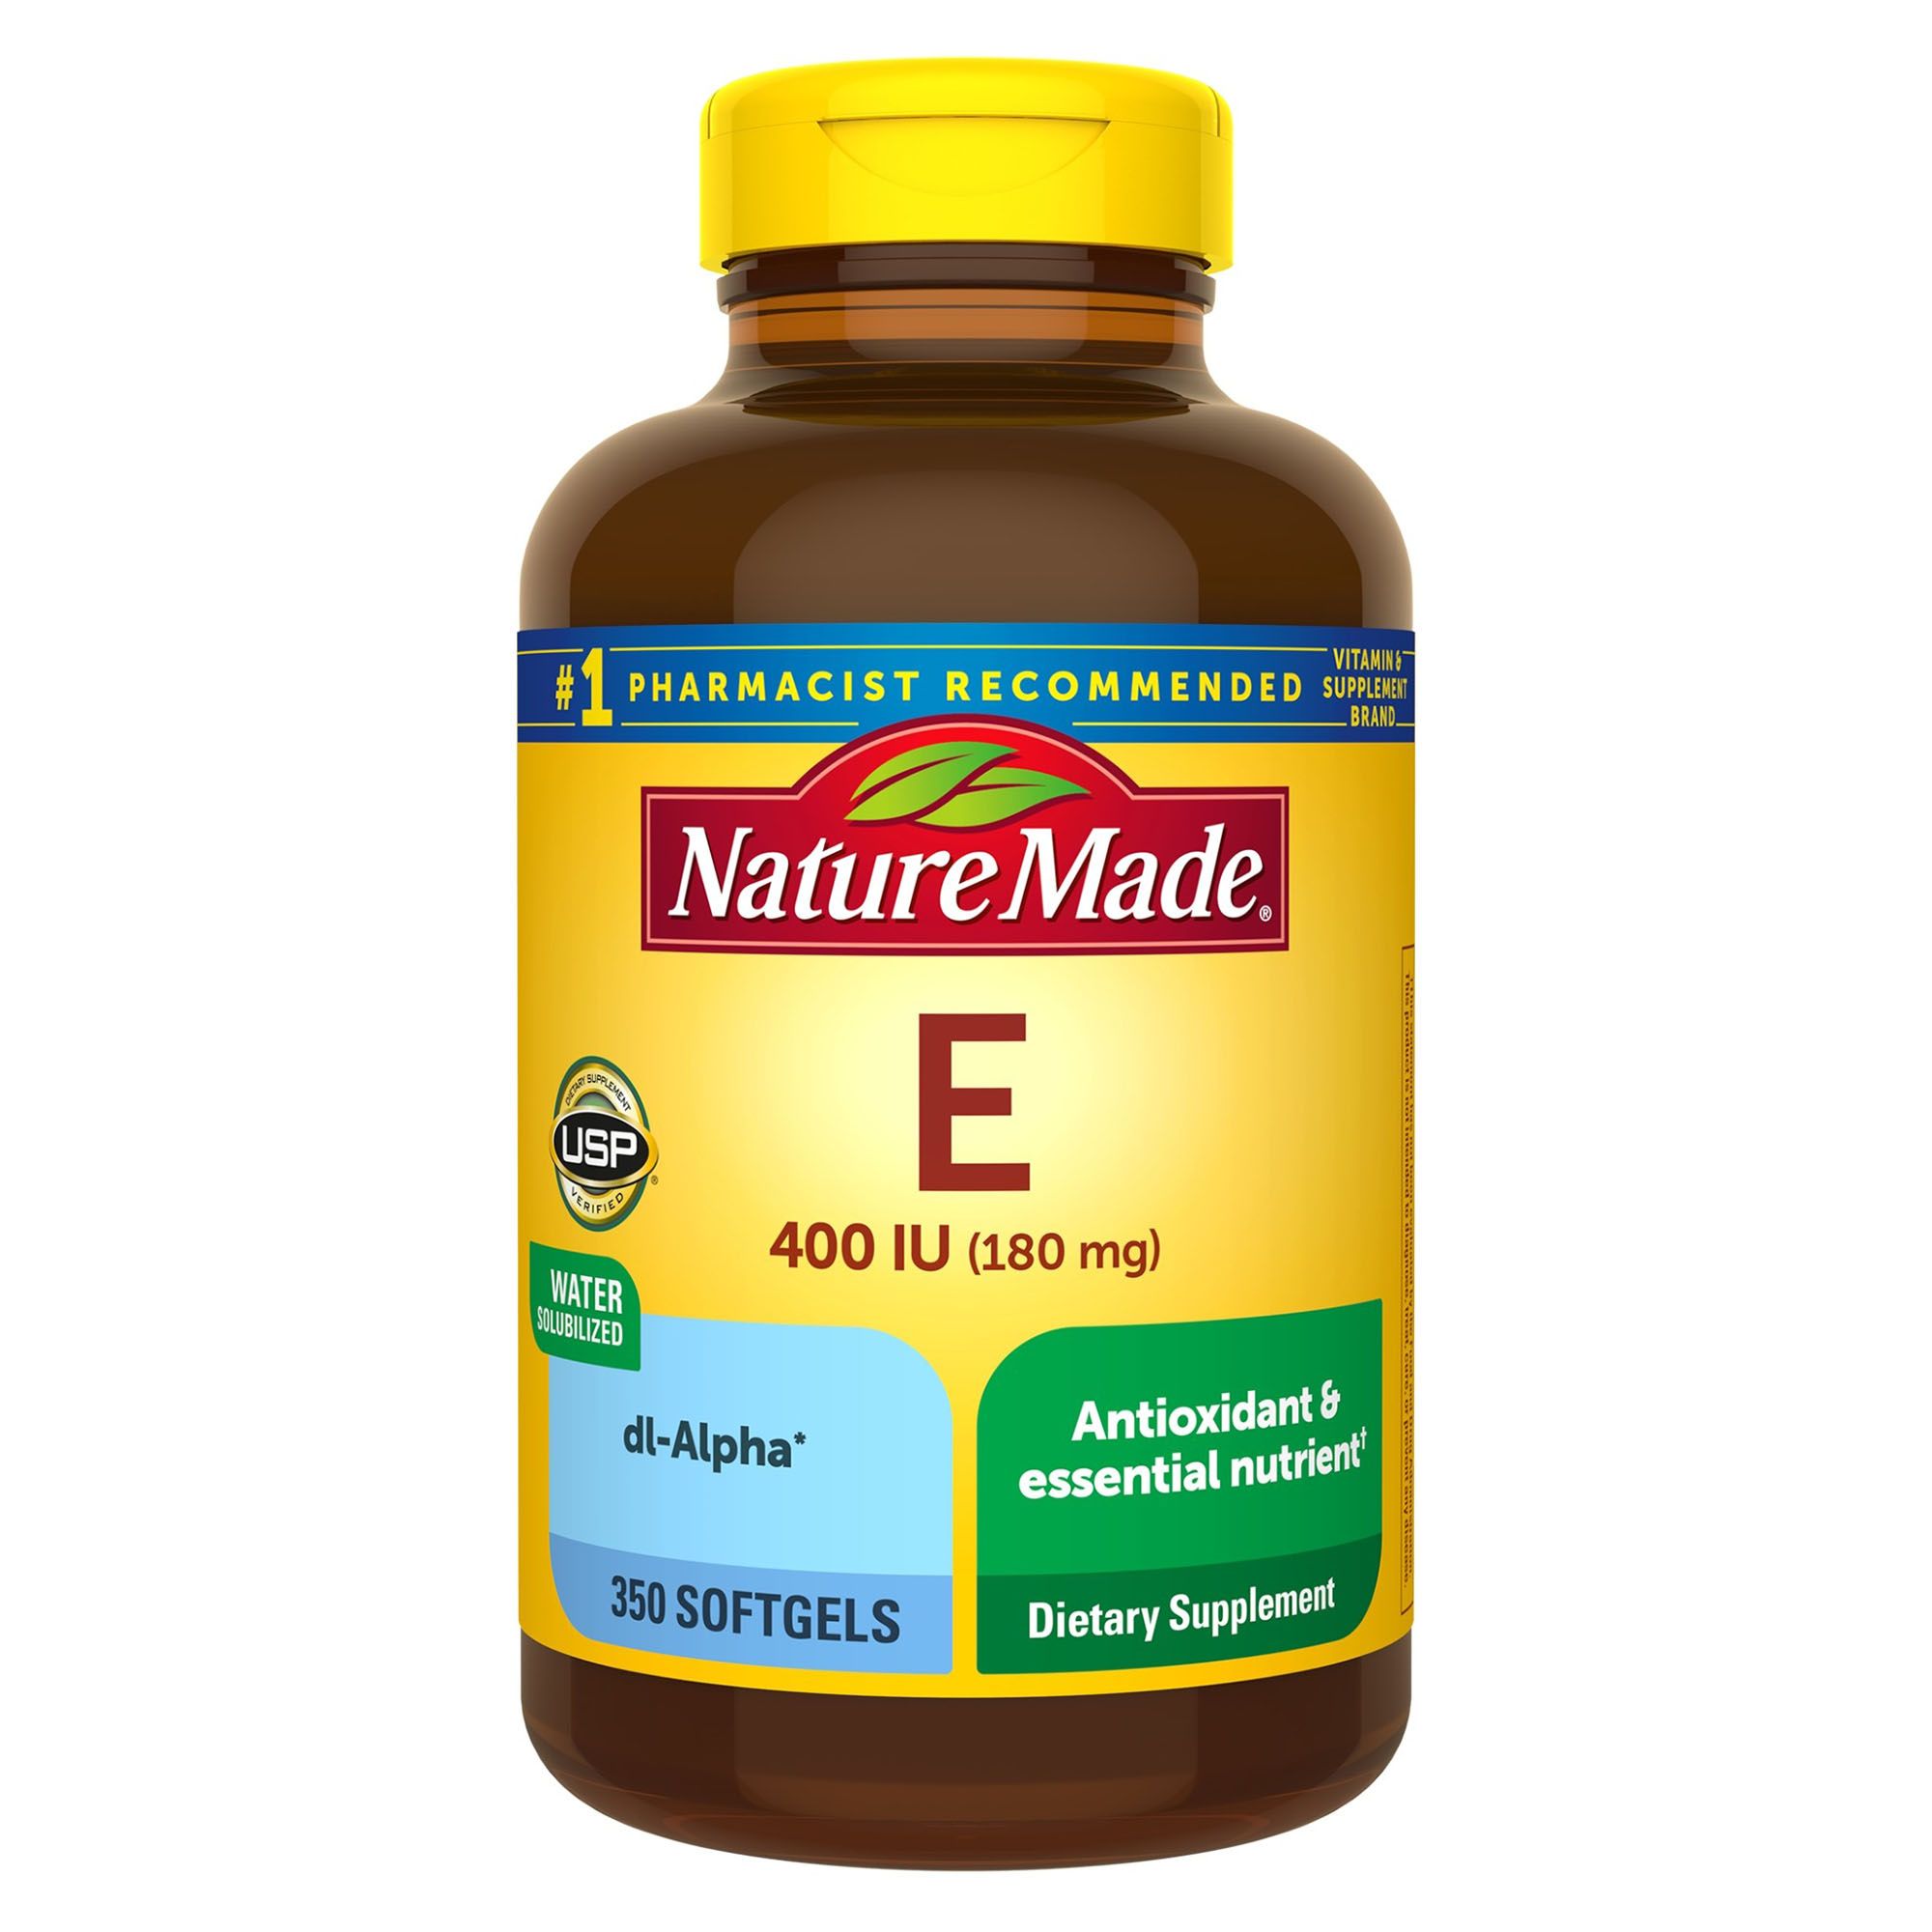 Nature Made 400 Iu Water Solubilized Vitamin E Softgels 350 Ct